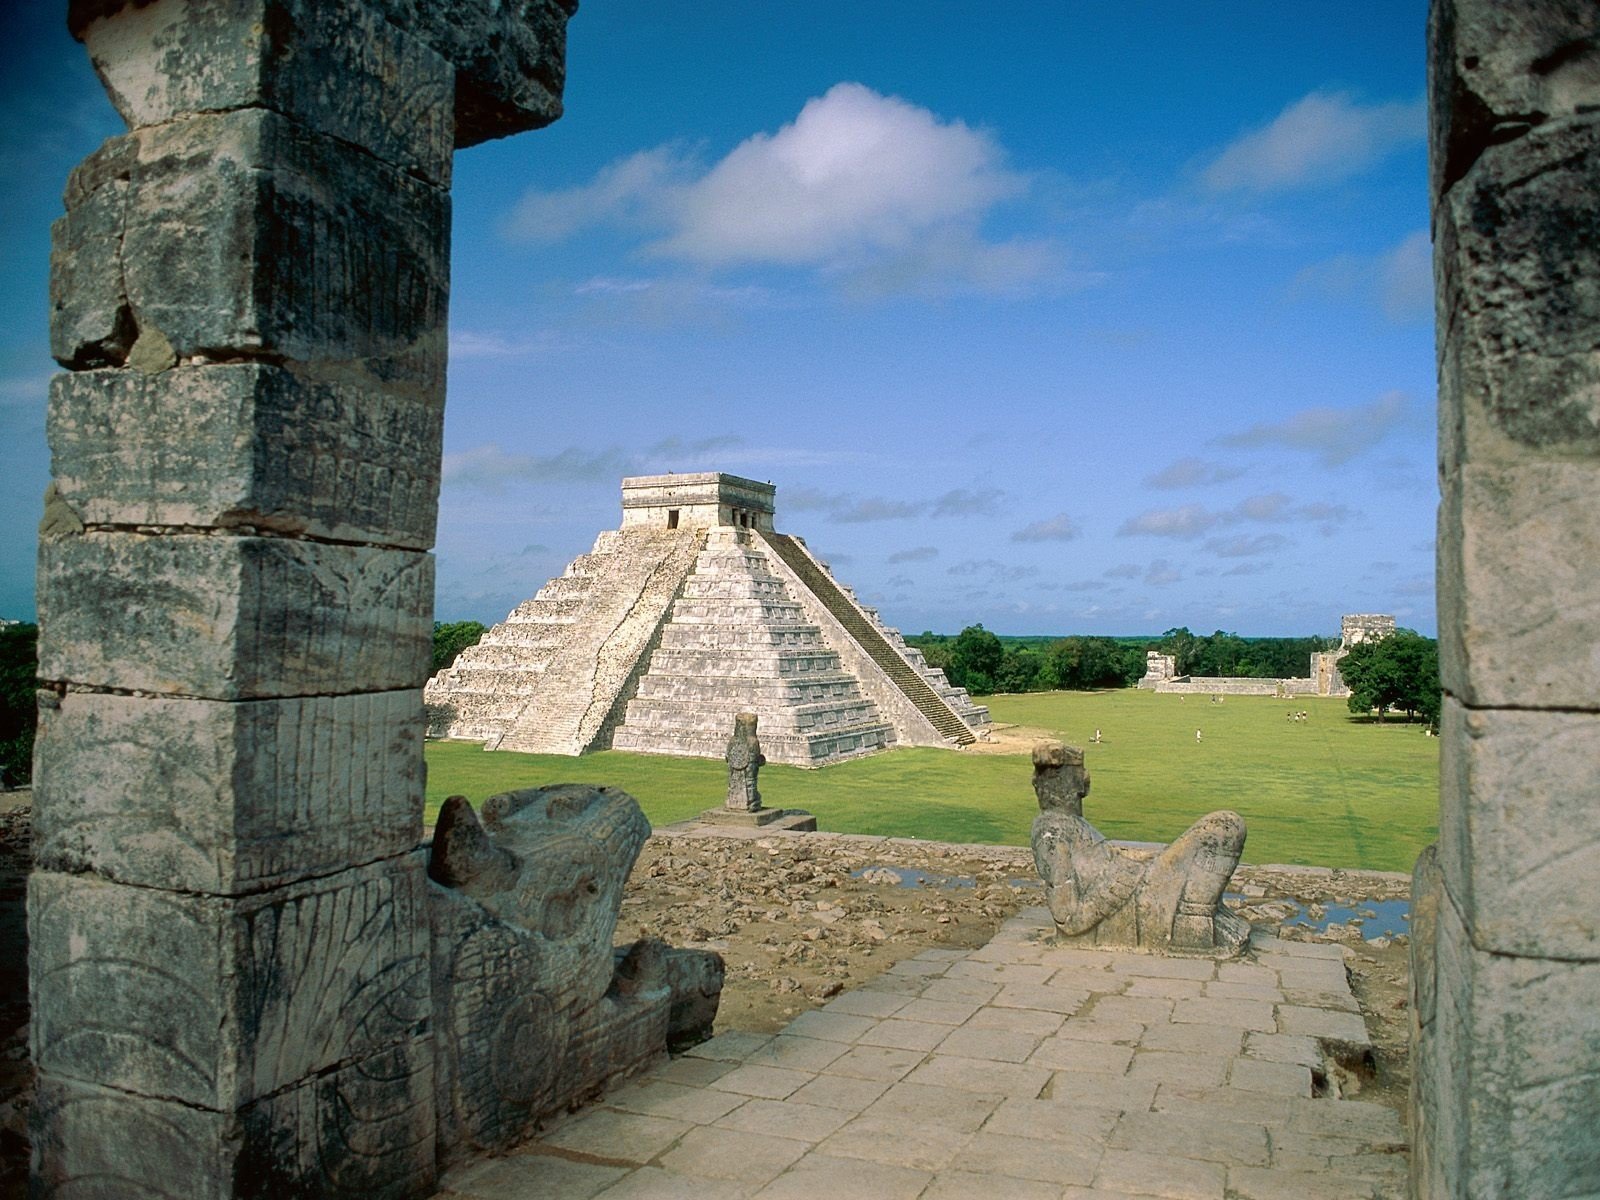 landscapes, Architecture, Mexico, Ancient, Hdr, Photography, Pyramids Wallpaper